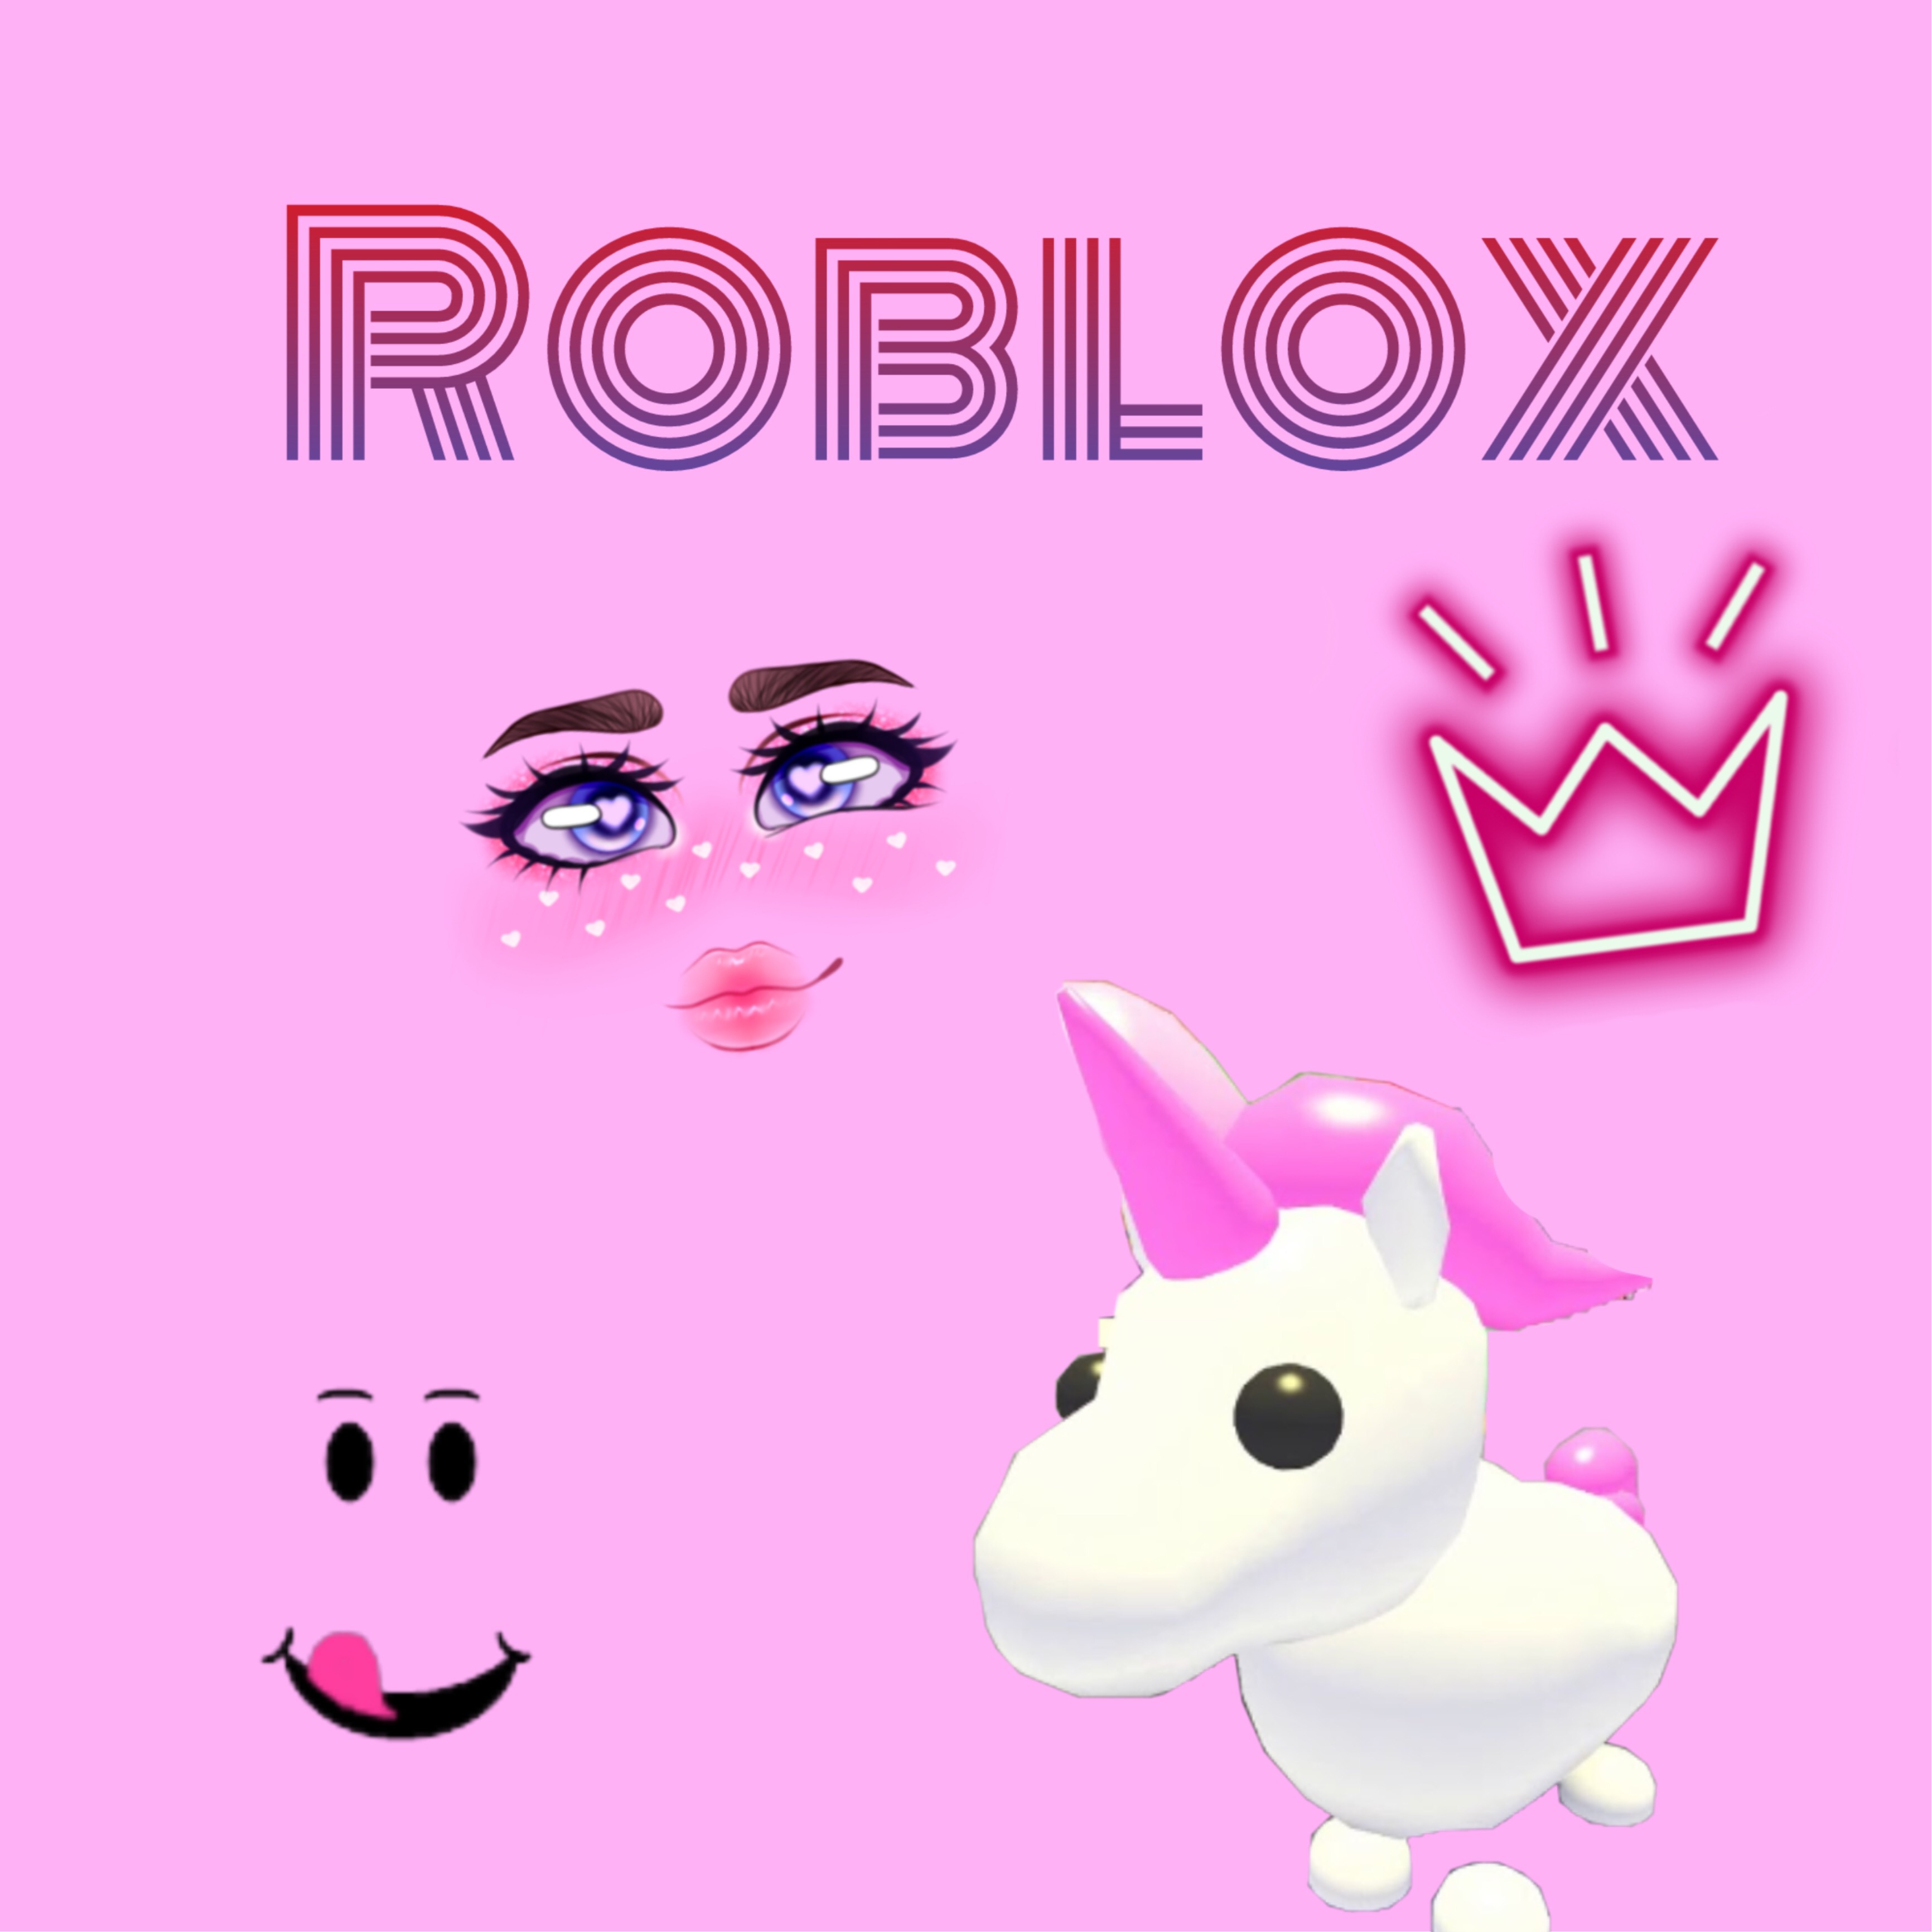 Roblox Wallpaper Wallpaperedit Image By Wallpaper - roblox background changer